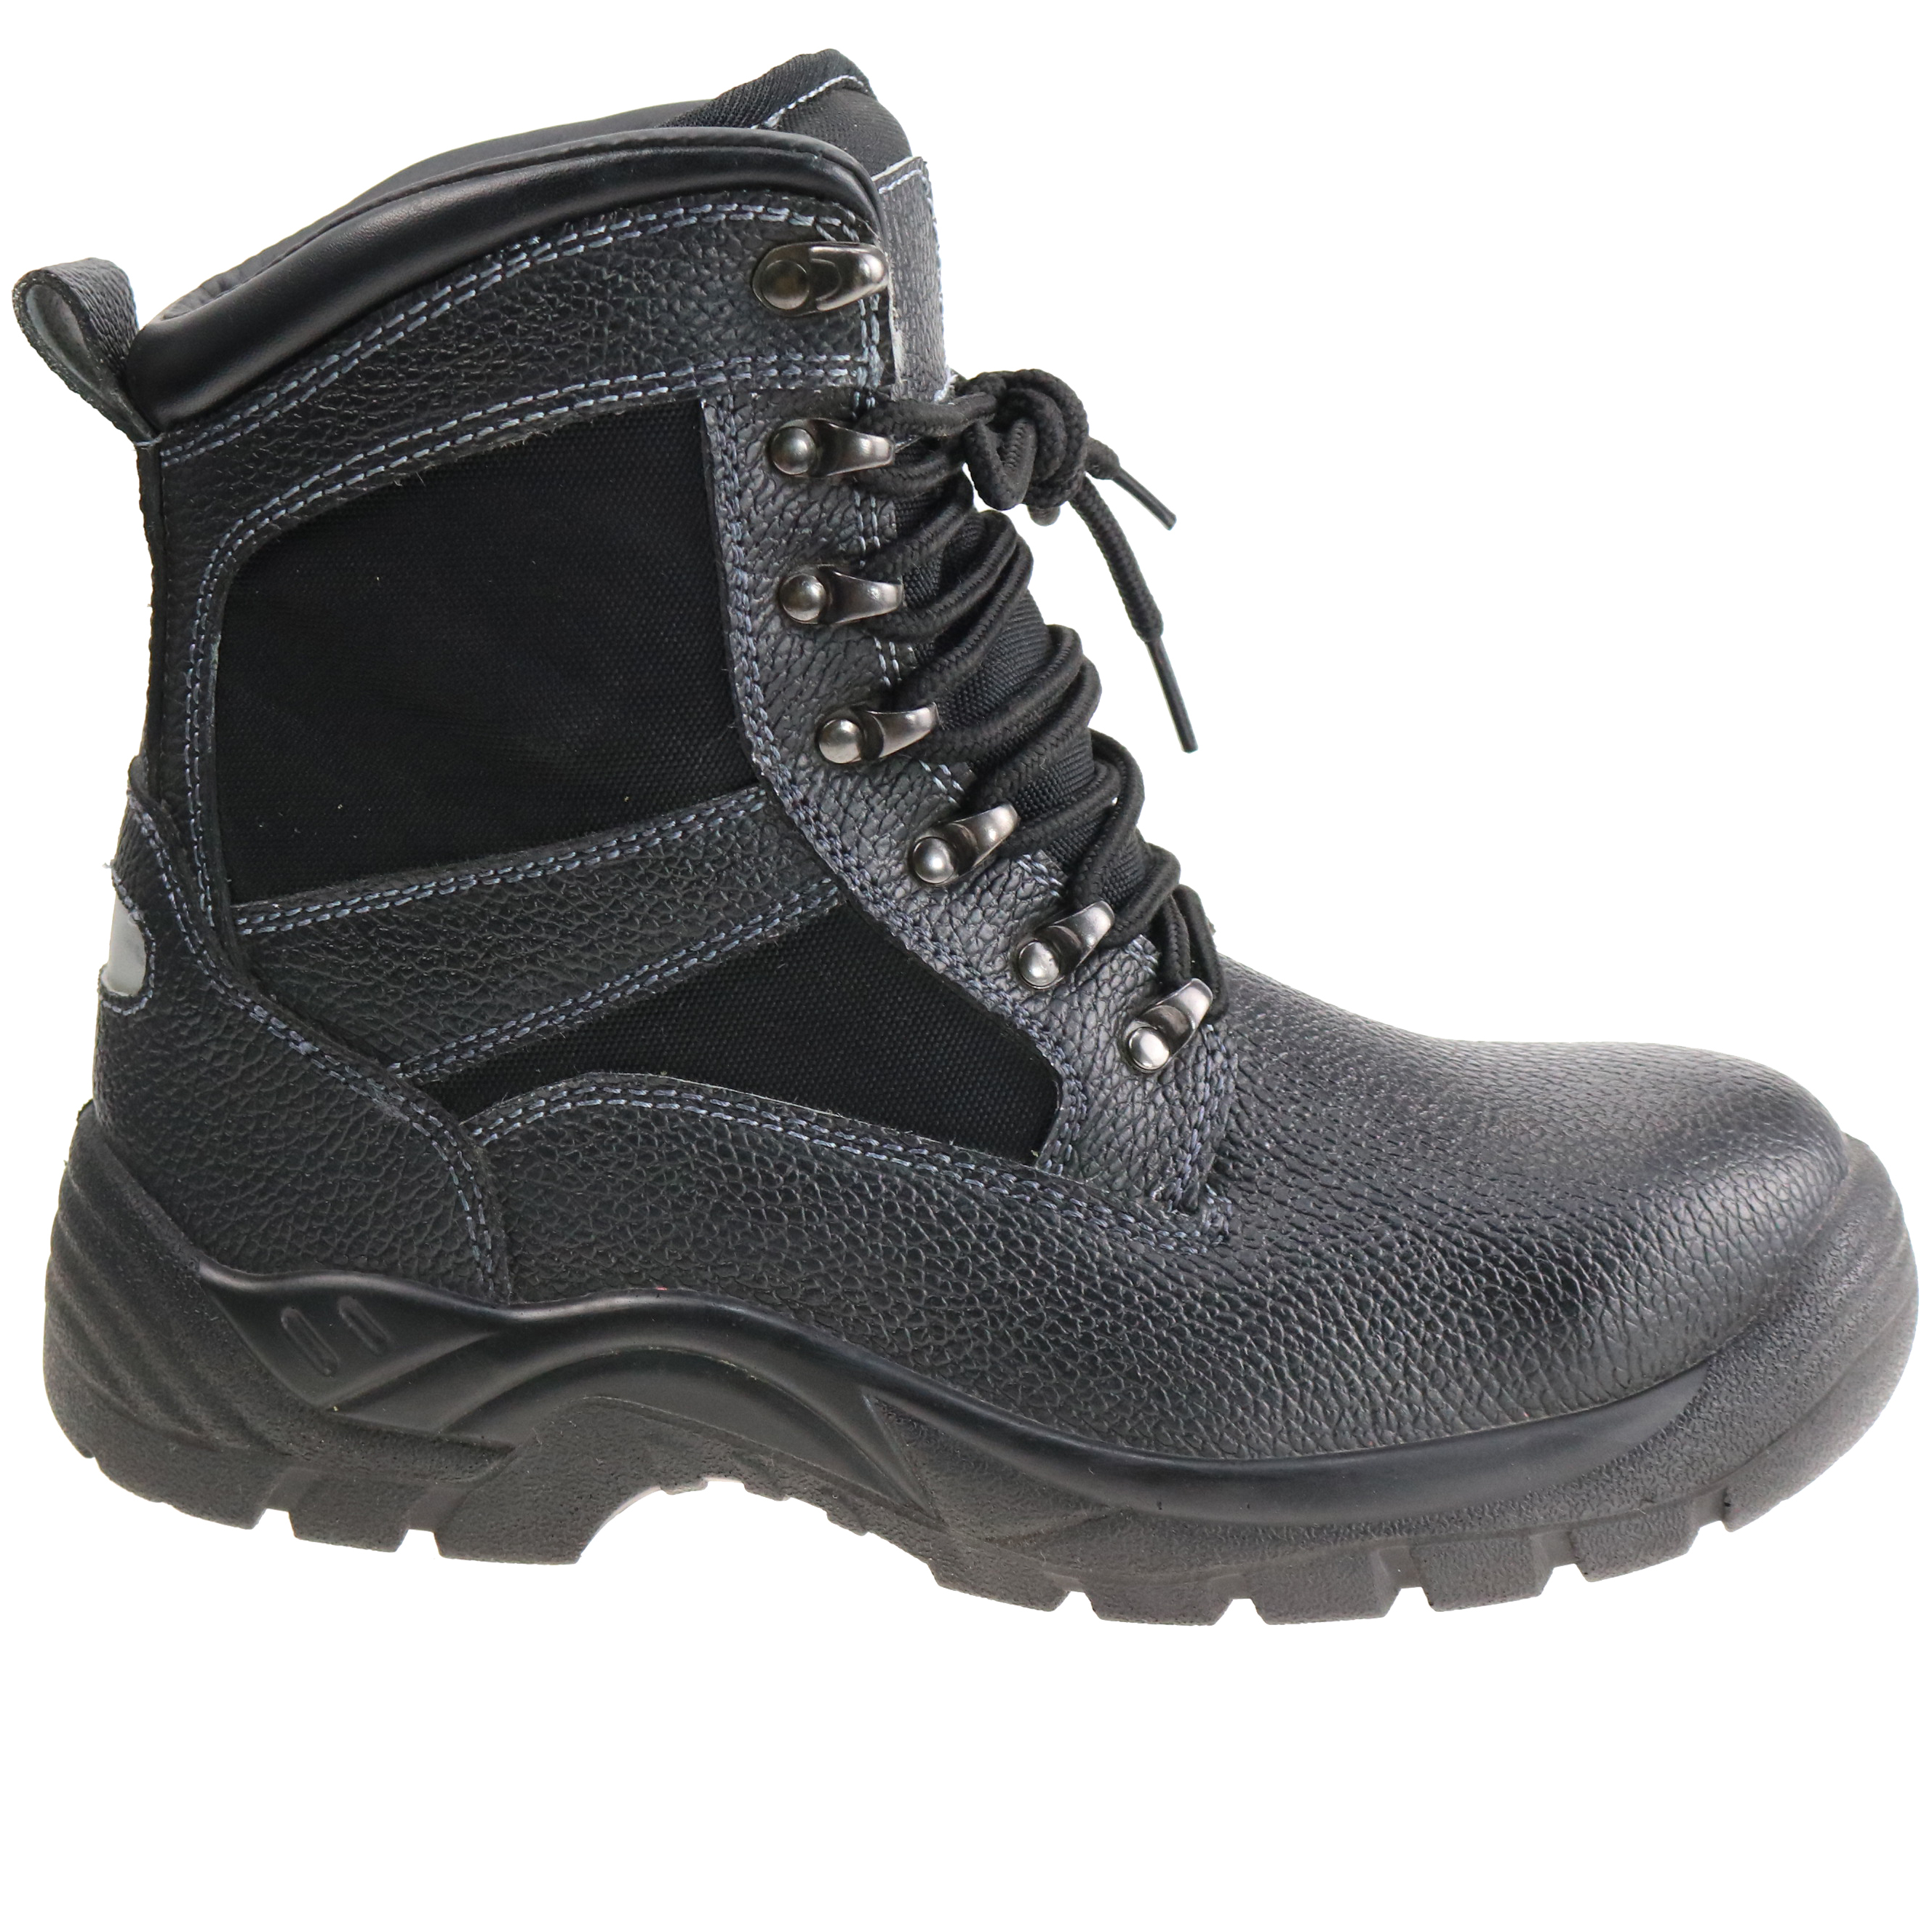 Genuine Leather Safety Shoes Work Boots  Come From China Factory & Safety Boots With Lace Up